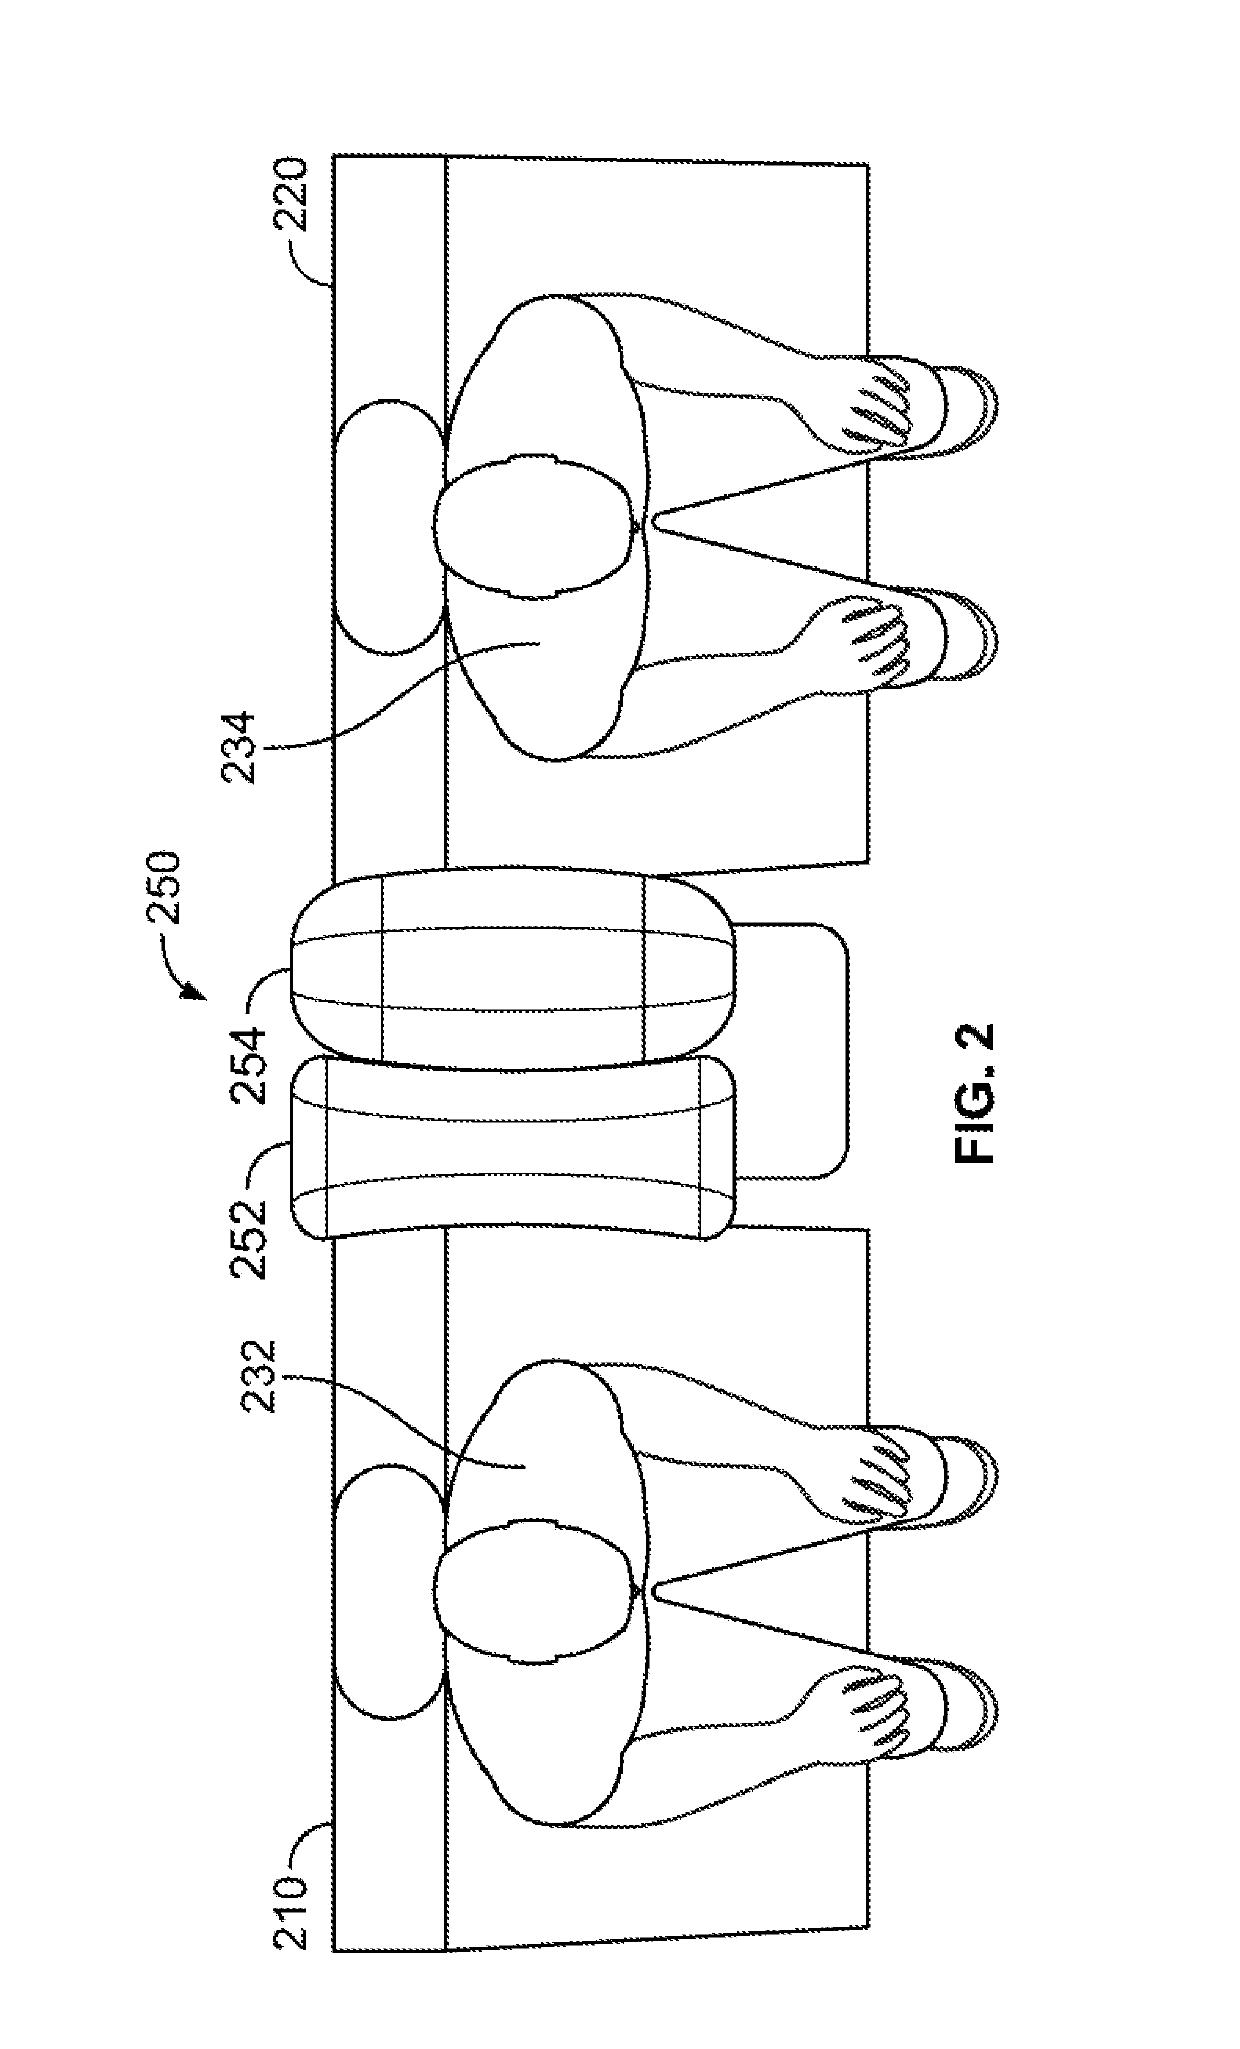 Airbag arrangement for protection in a far-side vehicular crash